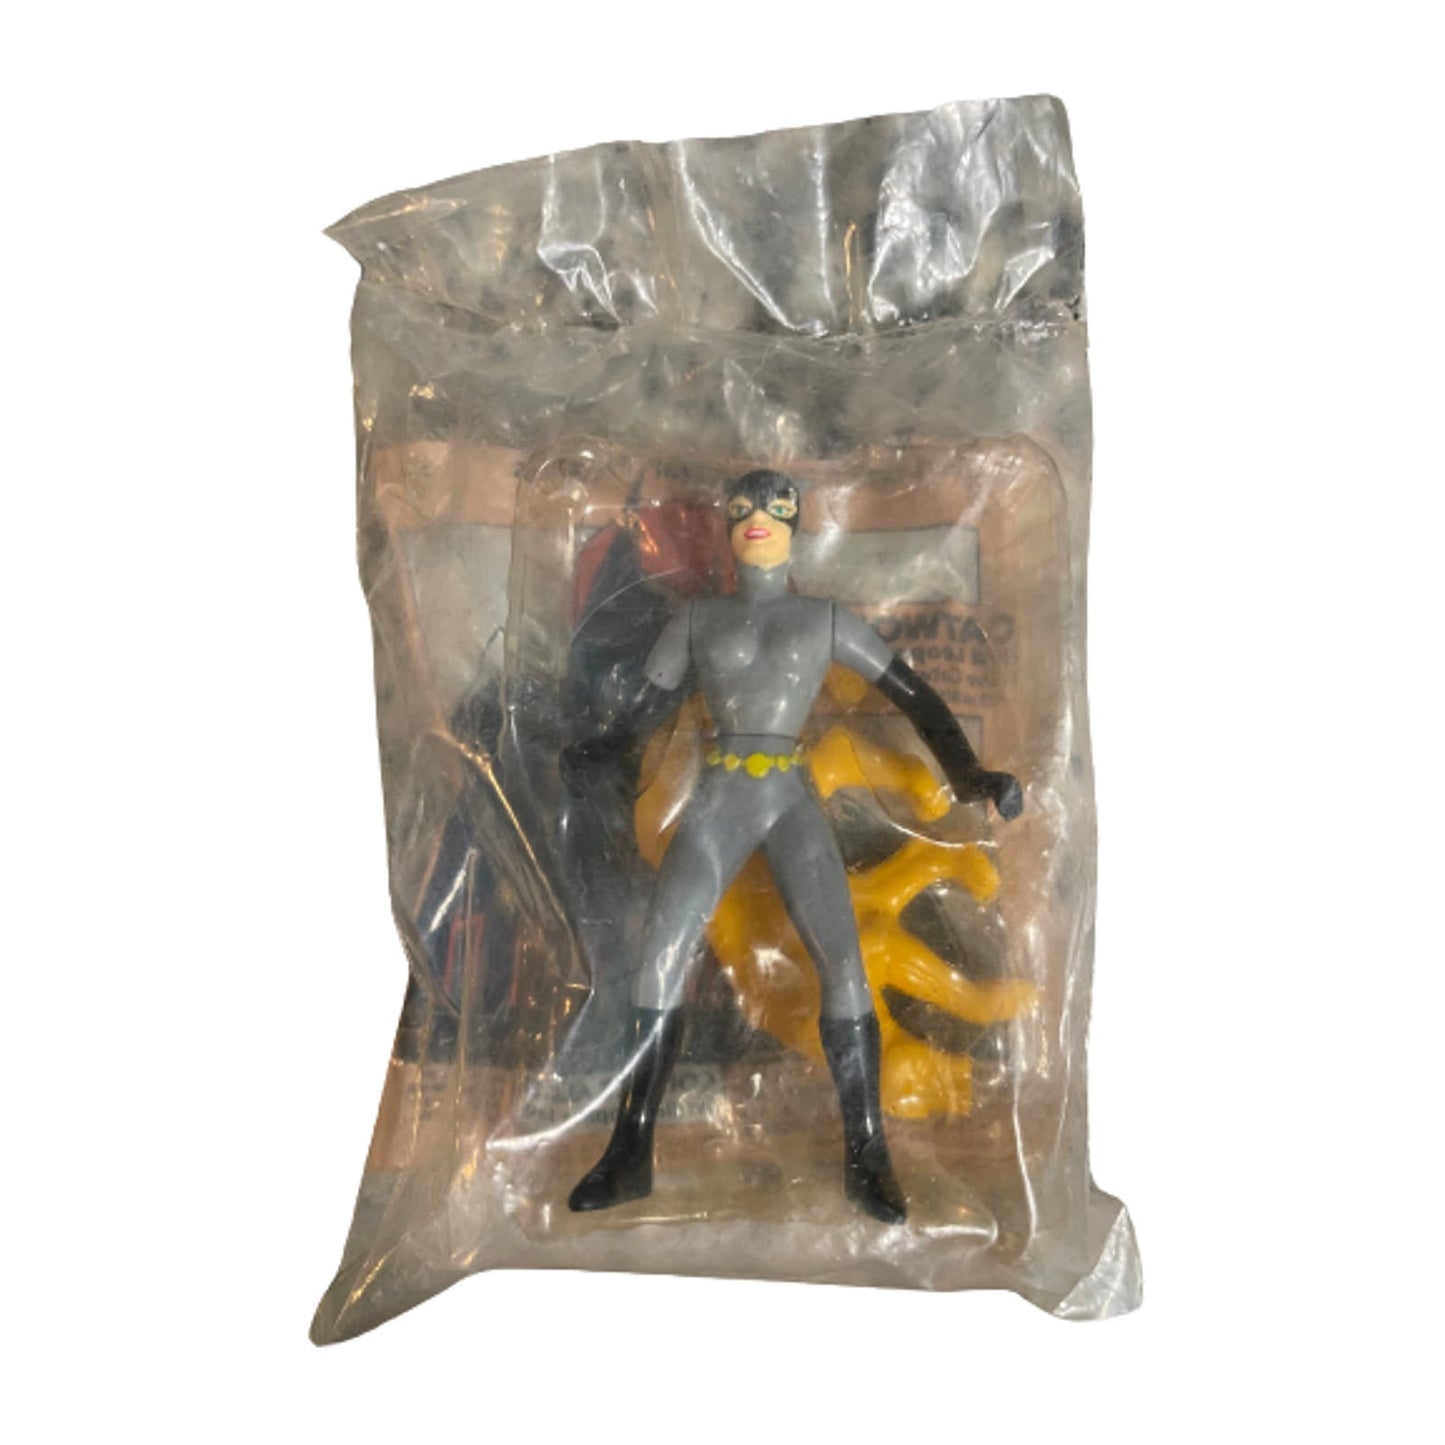 Vintage McDonald's Happy Meal Toy - Batman Animated Series, Cat Woman SEALED